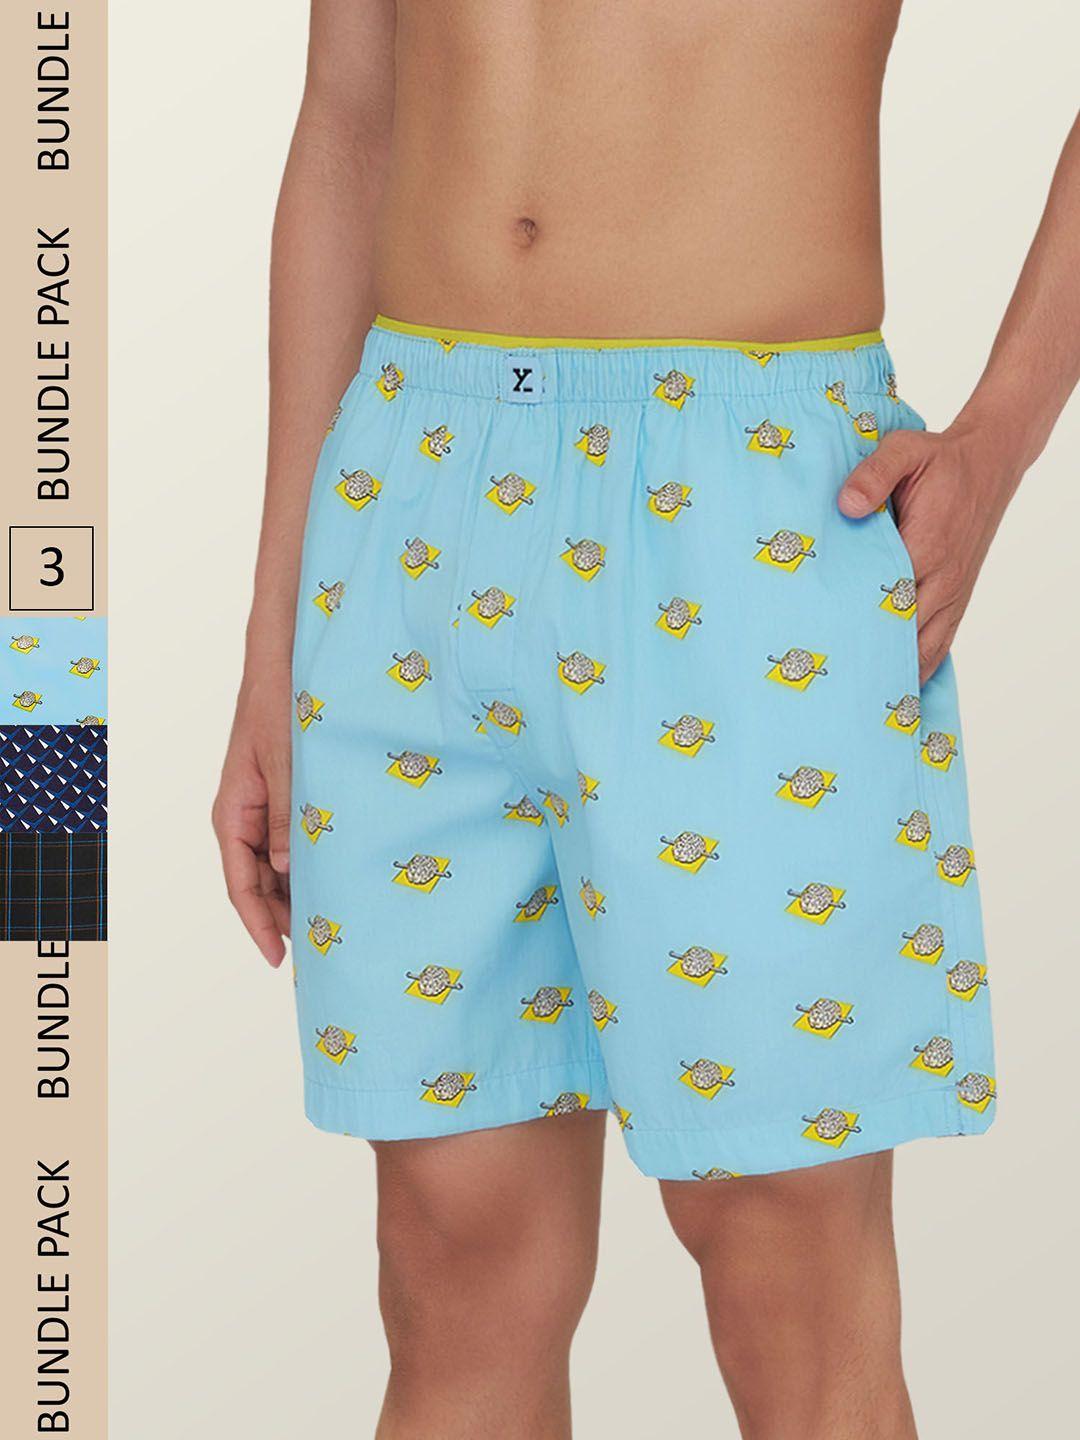 xyxx-men-pack-of-3-printed-super-combed-cotton-boxer